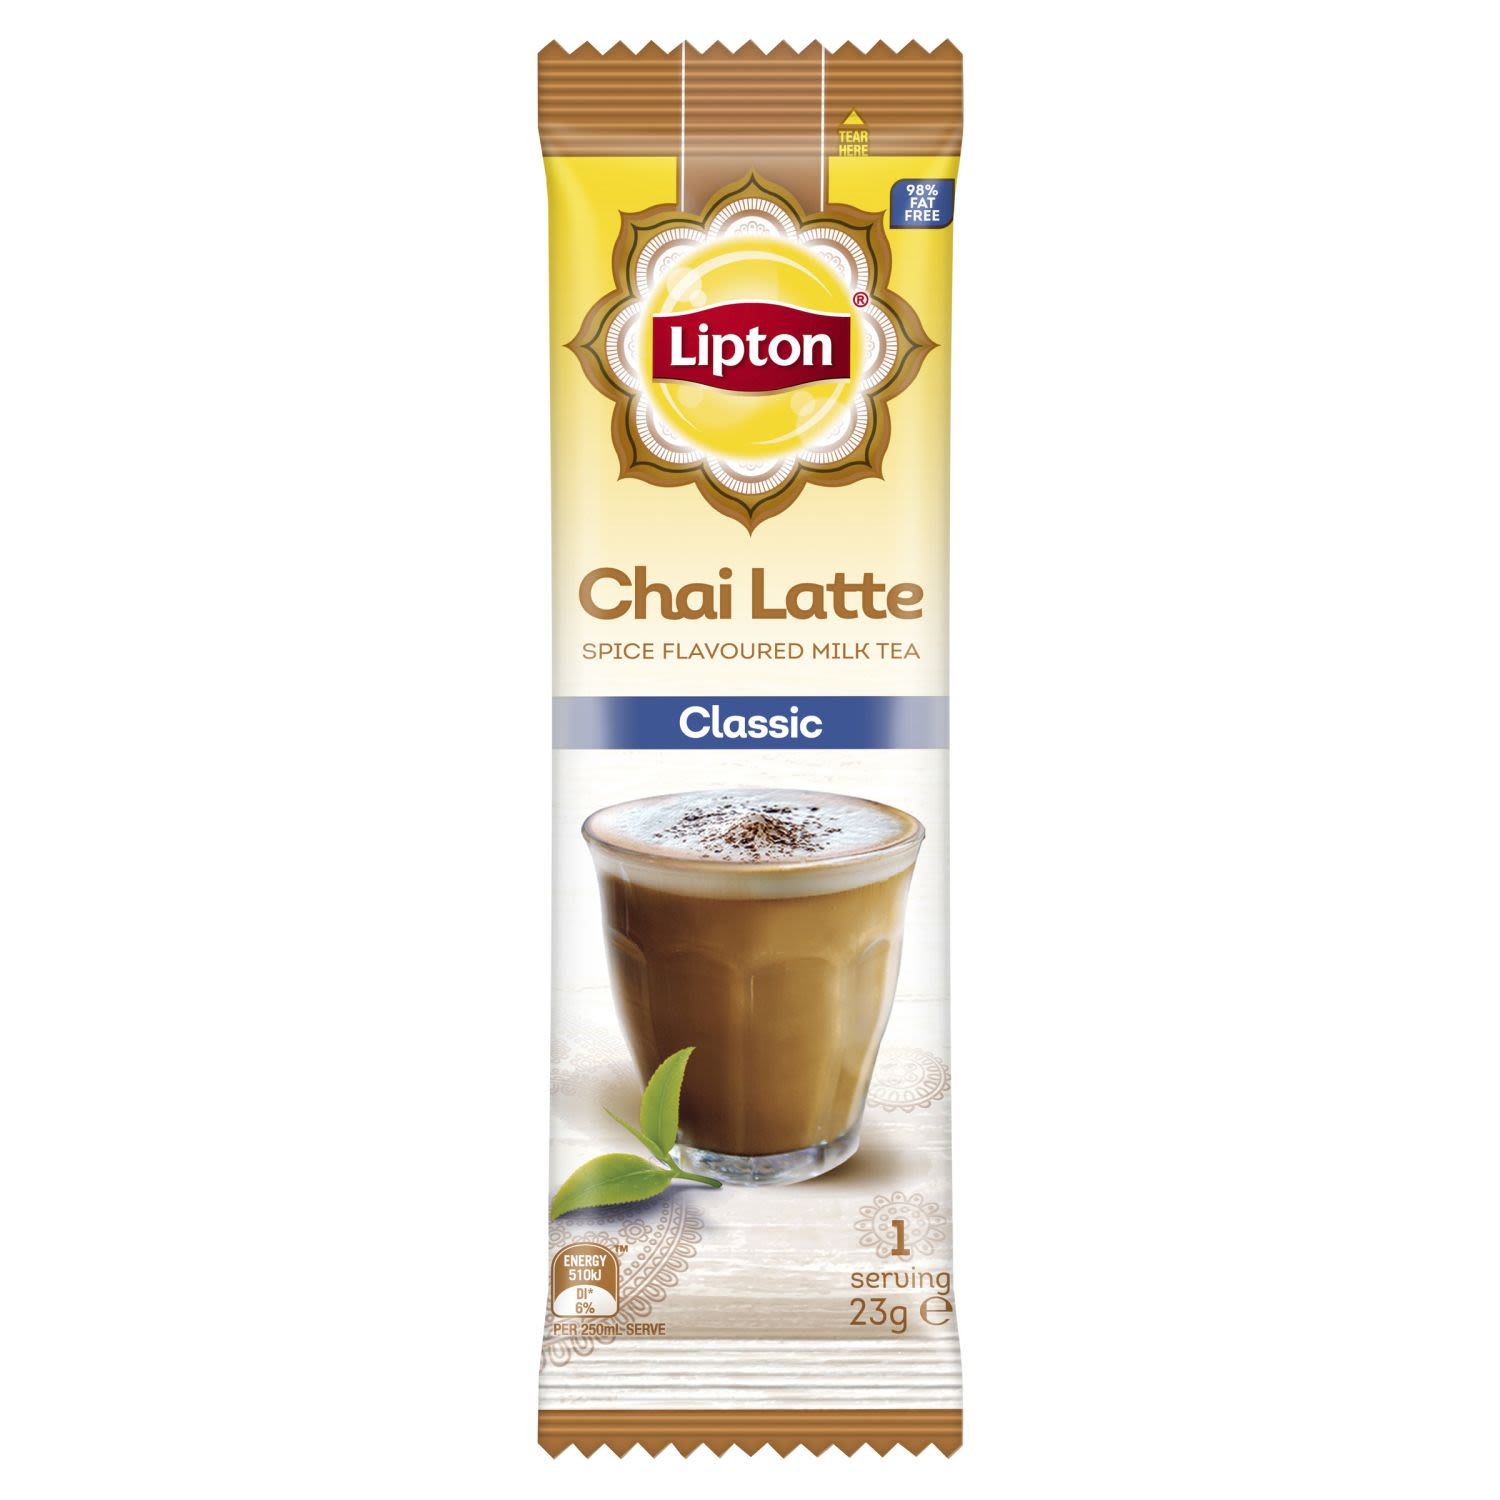 Lipton® Lipton Chai Latte Regular is a unique taste experience. It combines tea with exotic spice flavours such as cinnamon, cardamom and ginger with a delicious, creamy milk base. Just add hot water to enjoy a frothy latte style pick-me-up. Lipton Chai Latte is also 98% Fat Free. A refreshing taste for a feed good moment. At Lipton we recognise the importance of sustainability in the growth of our tea. With over 100 years of experience our approach to sustainability is holistic. We looked in detail at the social, environmental and economic aspects of tea production carrying out our own work and working with Rainforest Alliance to ensure all our tea is sourced sustainably. Now, all our tea blends are made with 100% natural, Rainforest Alliance™ certified tea leaves. Tea was originally an expensive drink, enjoyed exclusively by the wealthy. Thomas Lipton was a man on a mission – to share his passion for tea around the world. He believed that everyone deserved high quality, great tasting tea. And over 120 years later, that belief is still what drives us – inspiring more flavours, more varieties and more love than ever before. All our tea bags are 100% sustainably sourced, which translates into ensuring decent wages for tea farmers around the world together with access to quality housing, education and medical care. Your tea is their brighter future.<br /> <br />